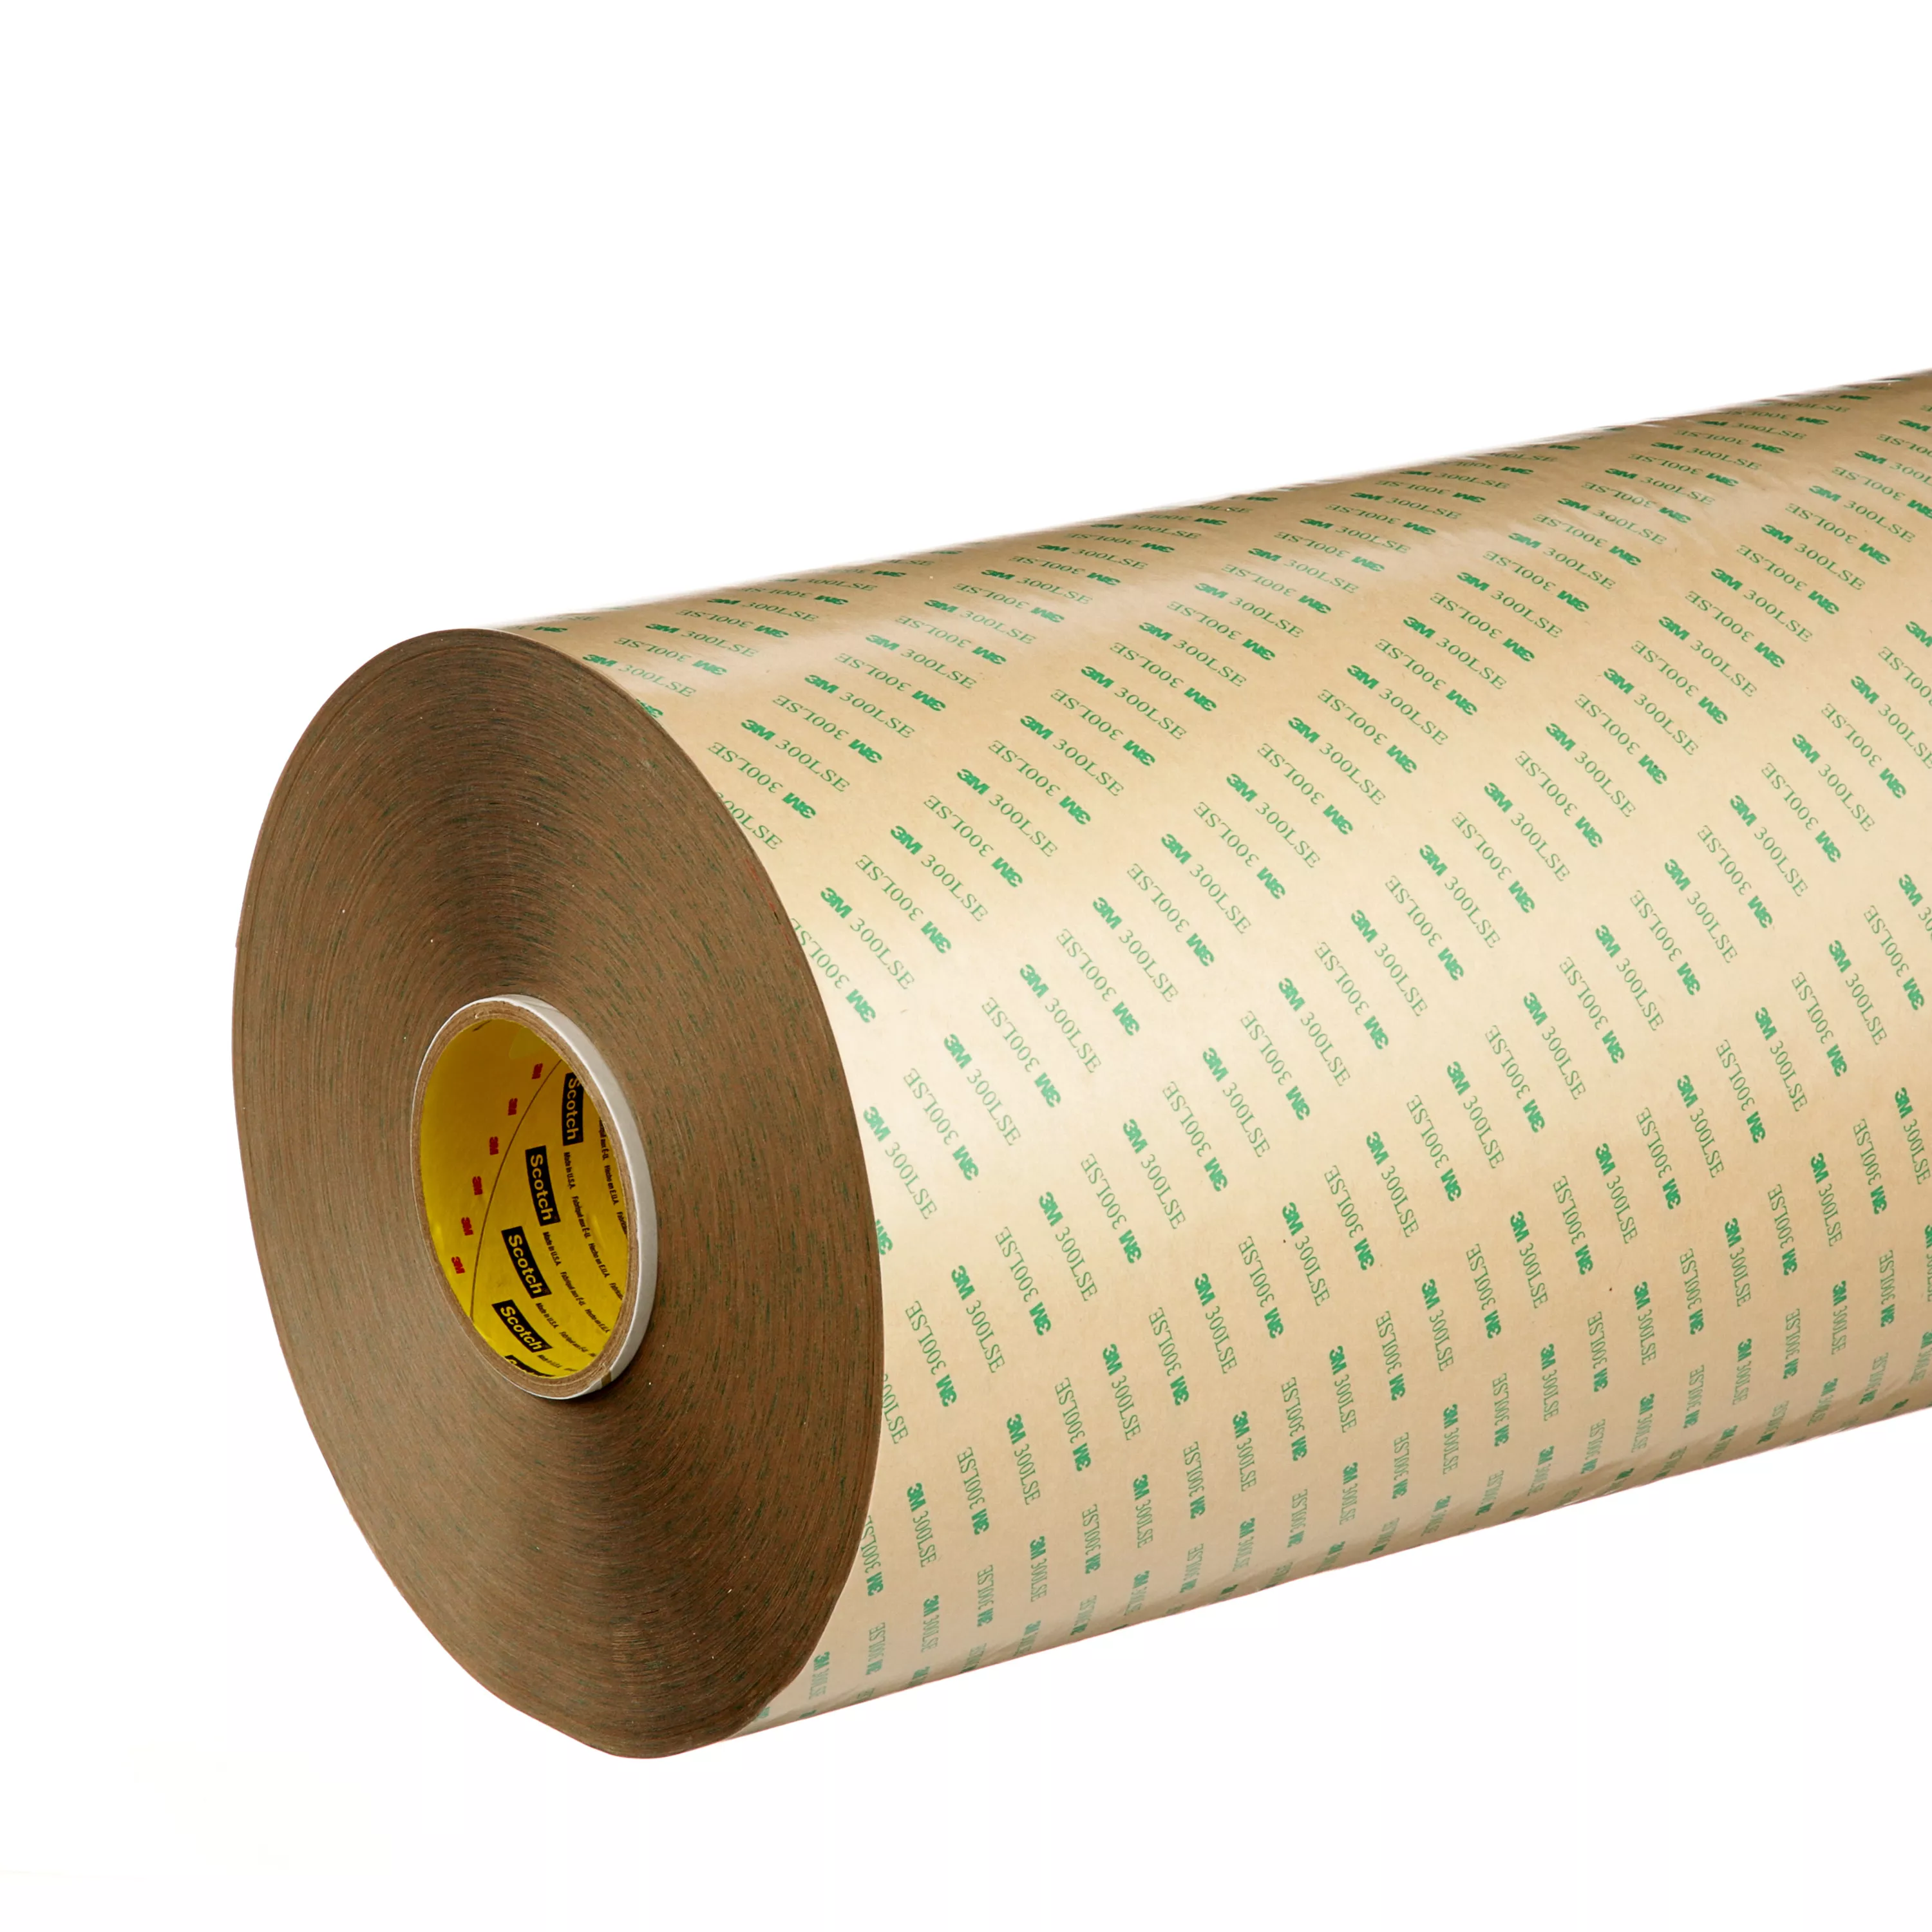 3M™ Adhesive Transfer Tape 9472LE, Clear, 27 in x 180 yd, 5.2 mil, 1
Roll/Case